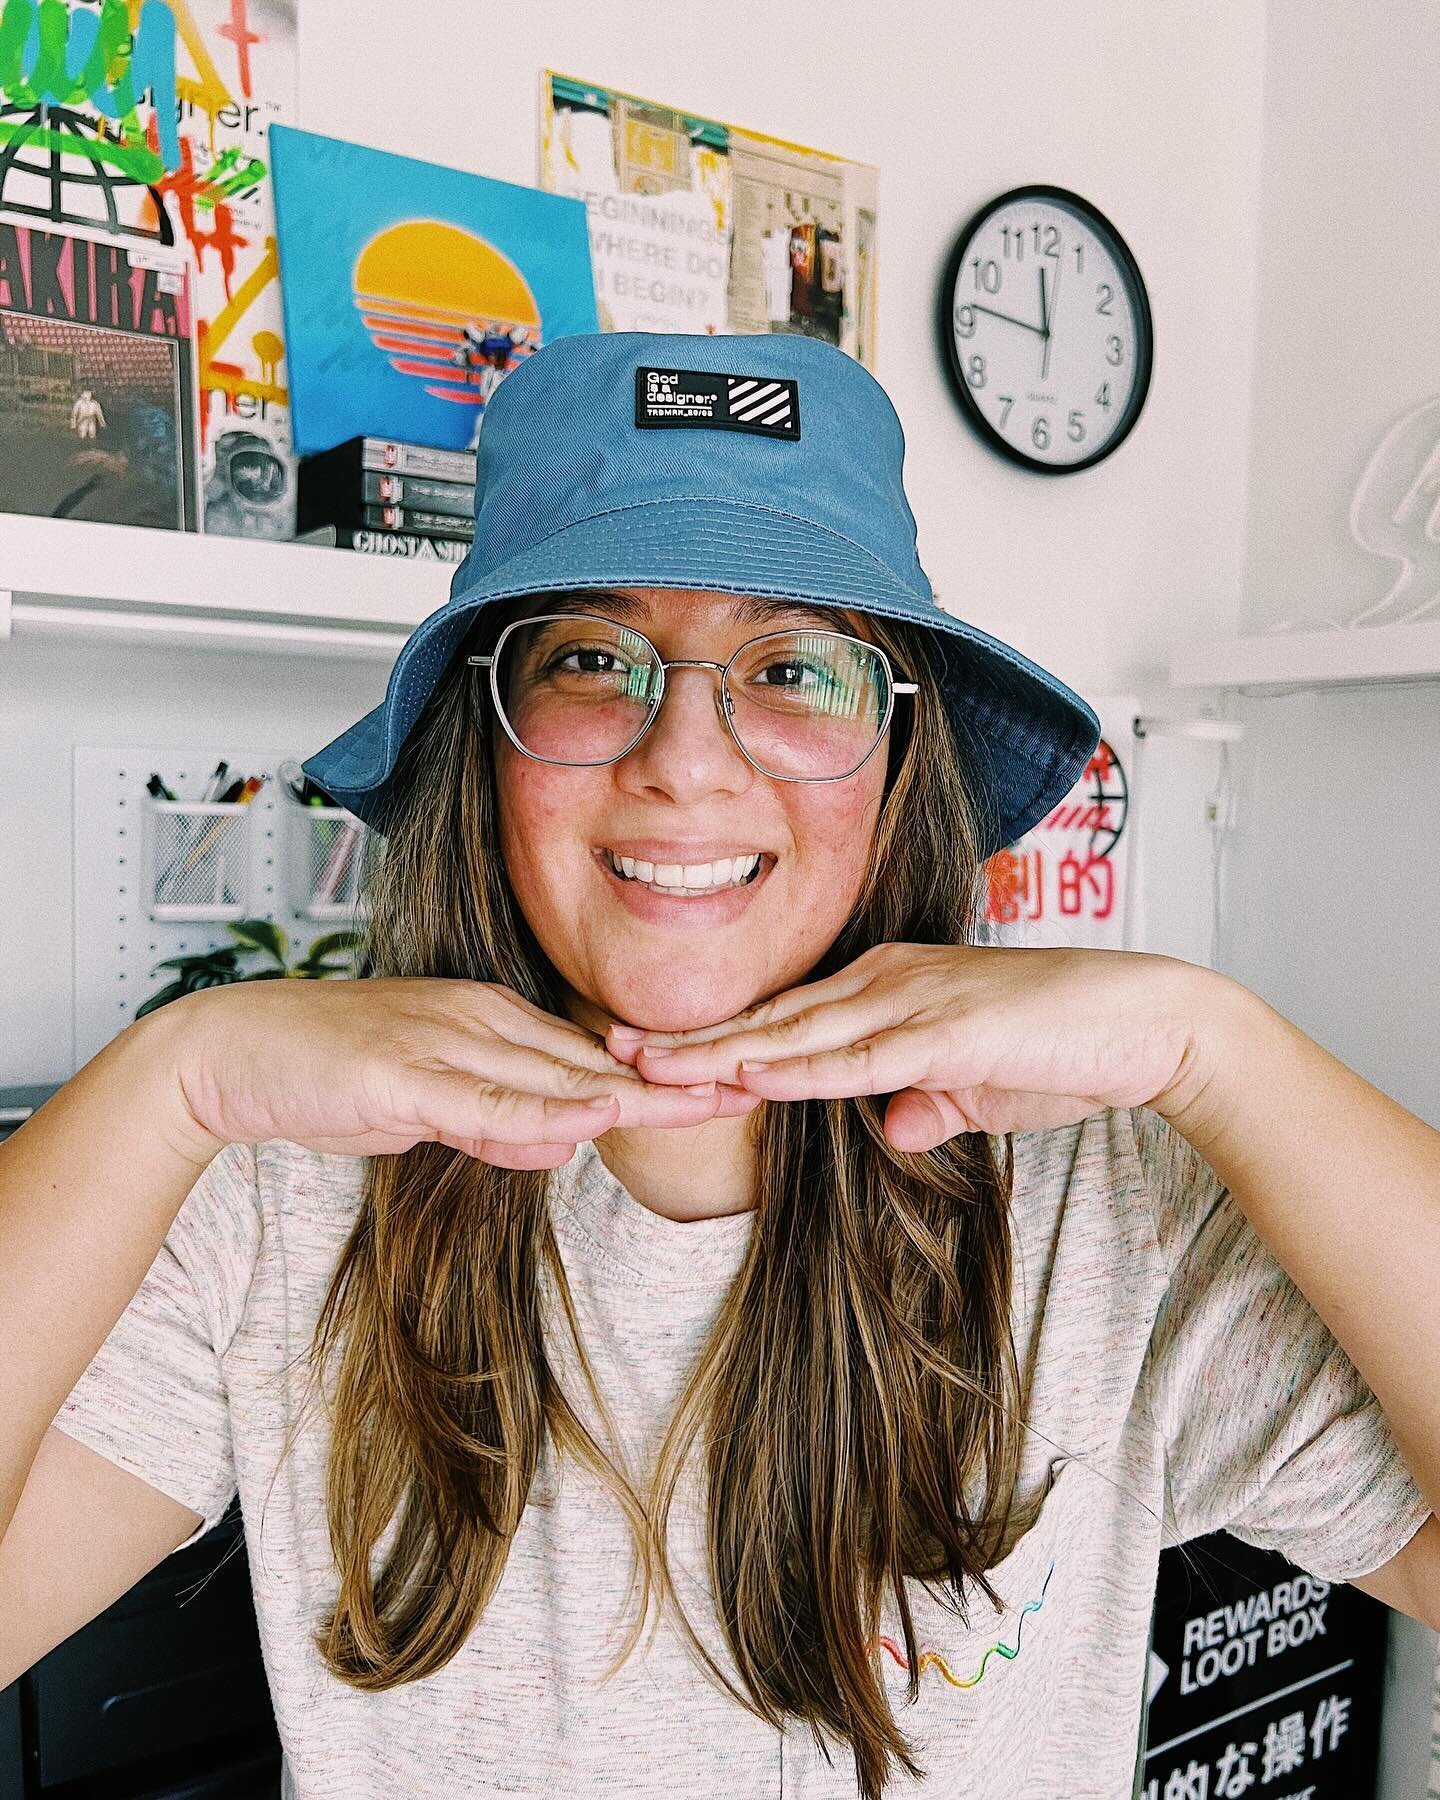 1- A @godisadesigner.co bucket hat we may never produce 😅
2- This Monday&rsquo;s H@zy Talk email 💌
3- WIP class presentation 📚
4- @madeinhouse.tv EP 09: Nurturing Leads 🤝
5- New trucker hat dropping in March 🚚
6- Team 😂
7- Design is math 🧮 
8-